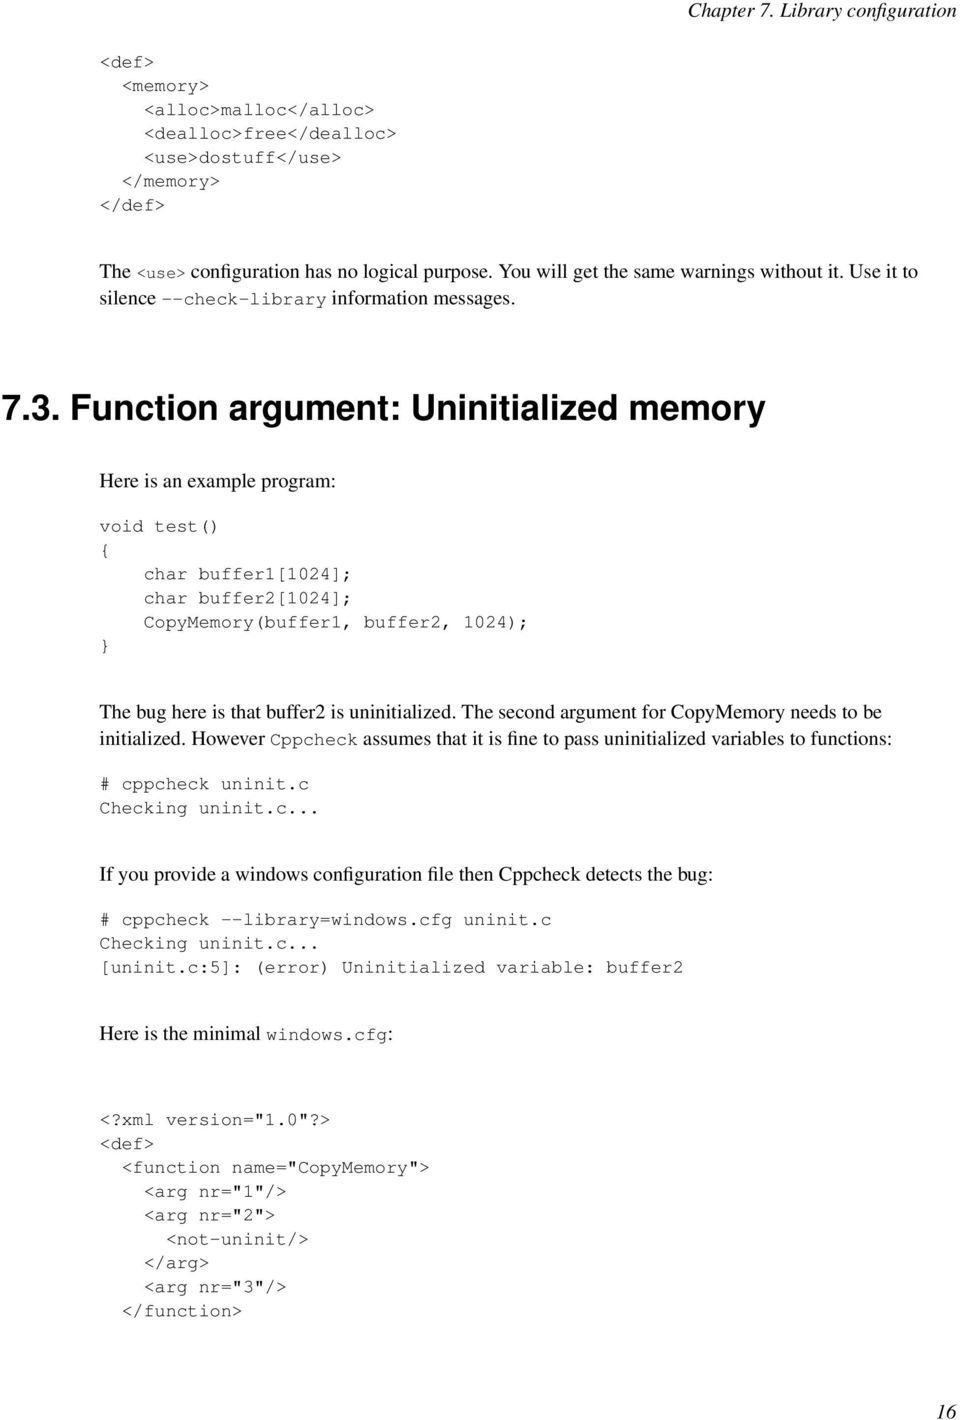 Function argument: Uninitialized memory Here is an example program: void test() { char buffer1[1024]; char buffer2[1024]; CopyMemory(buffer1, buffer2, 1024); } The bug here is that buffer2 is